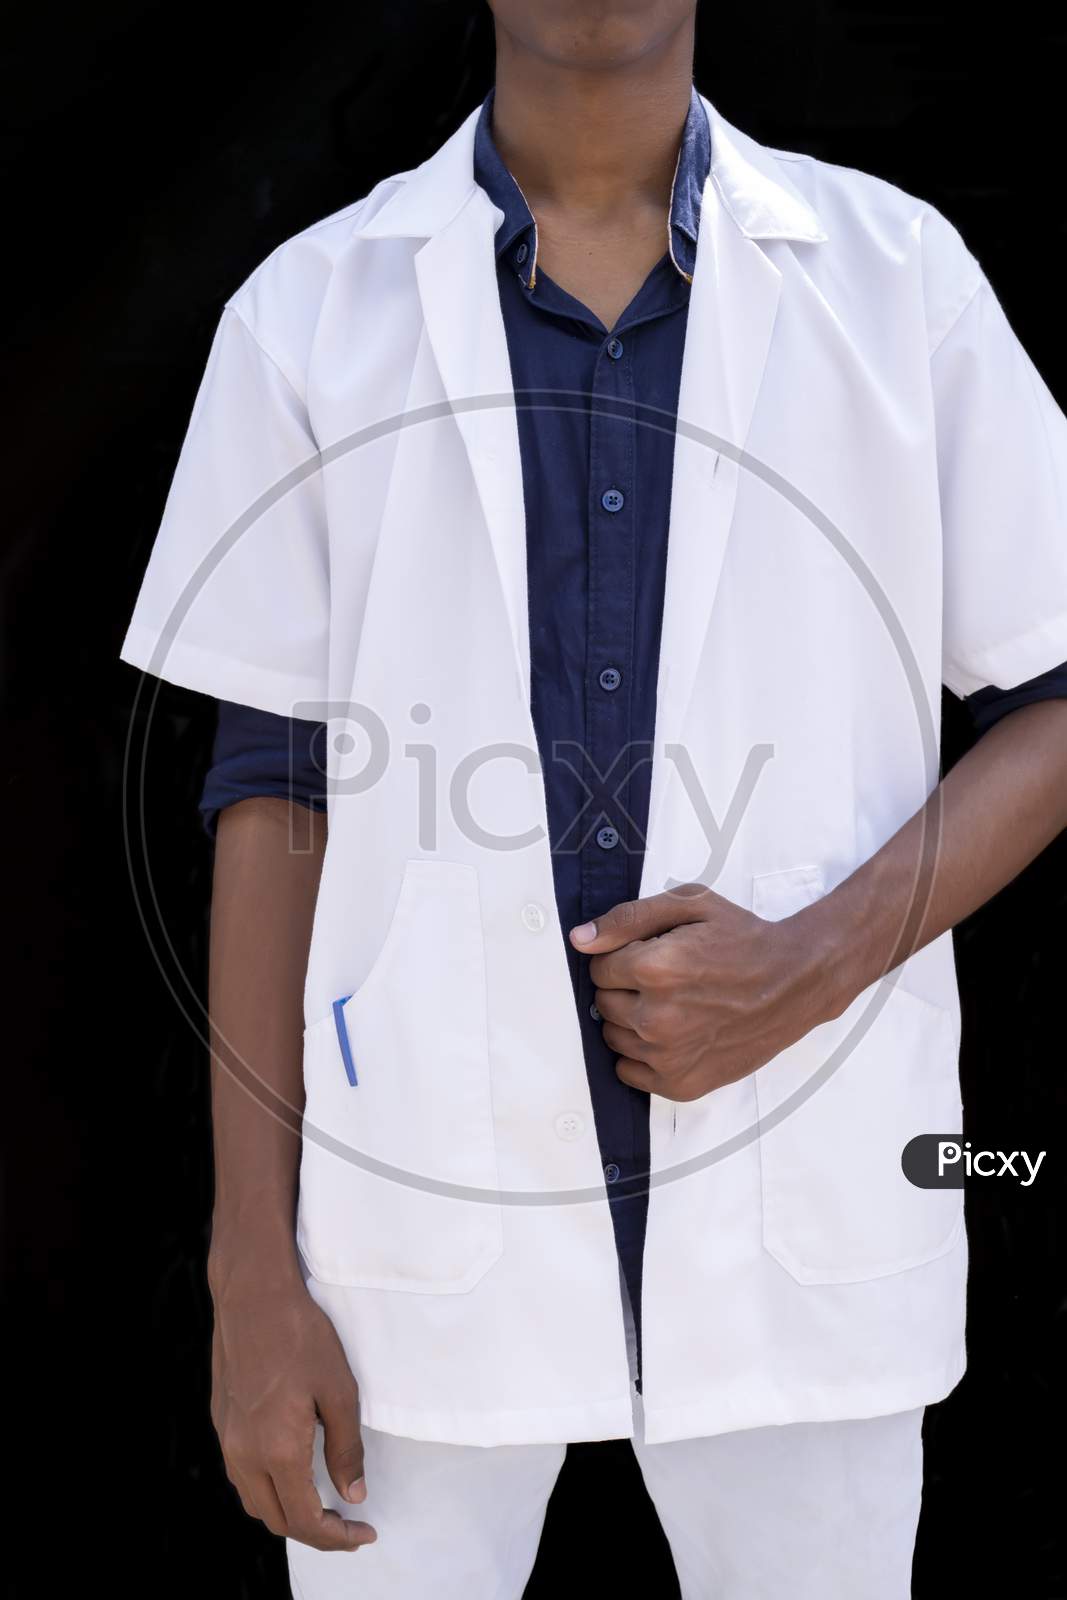 Cropped Portrait Of A Young Male Doctor With Hands Holding A White Coat On A Black Background